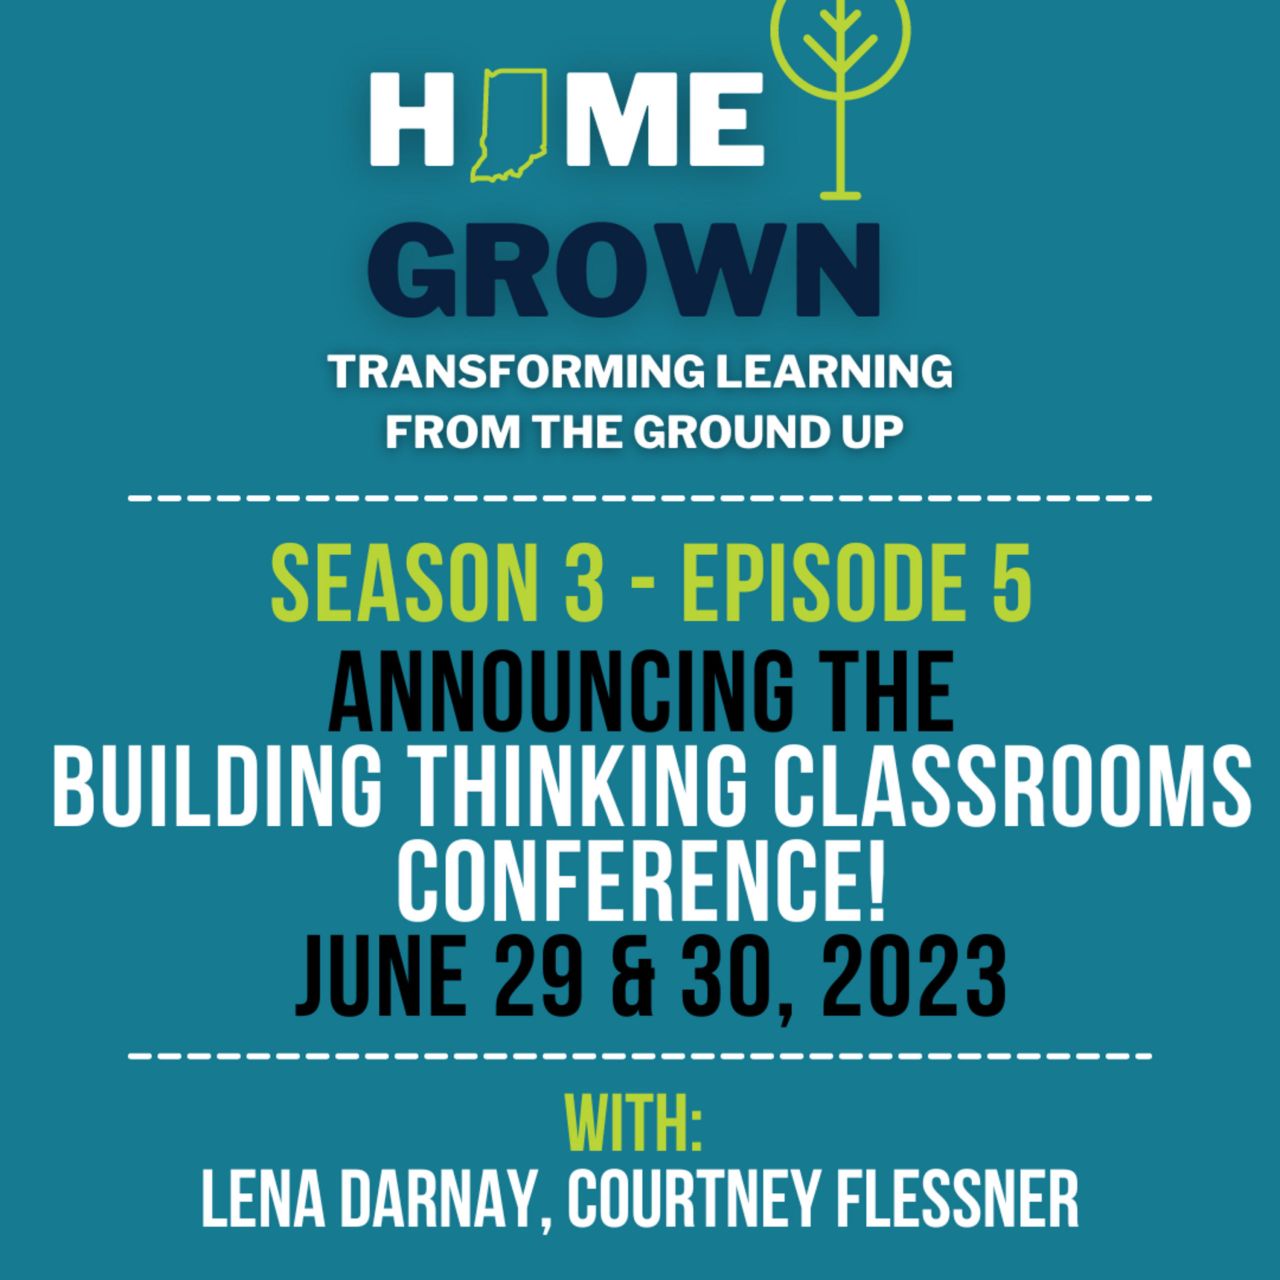 Building Thinking Classrooms Conference – Save the Date!